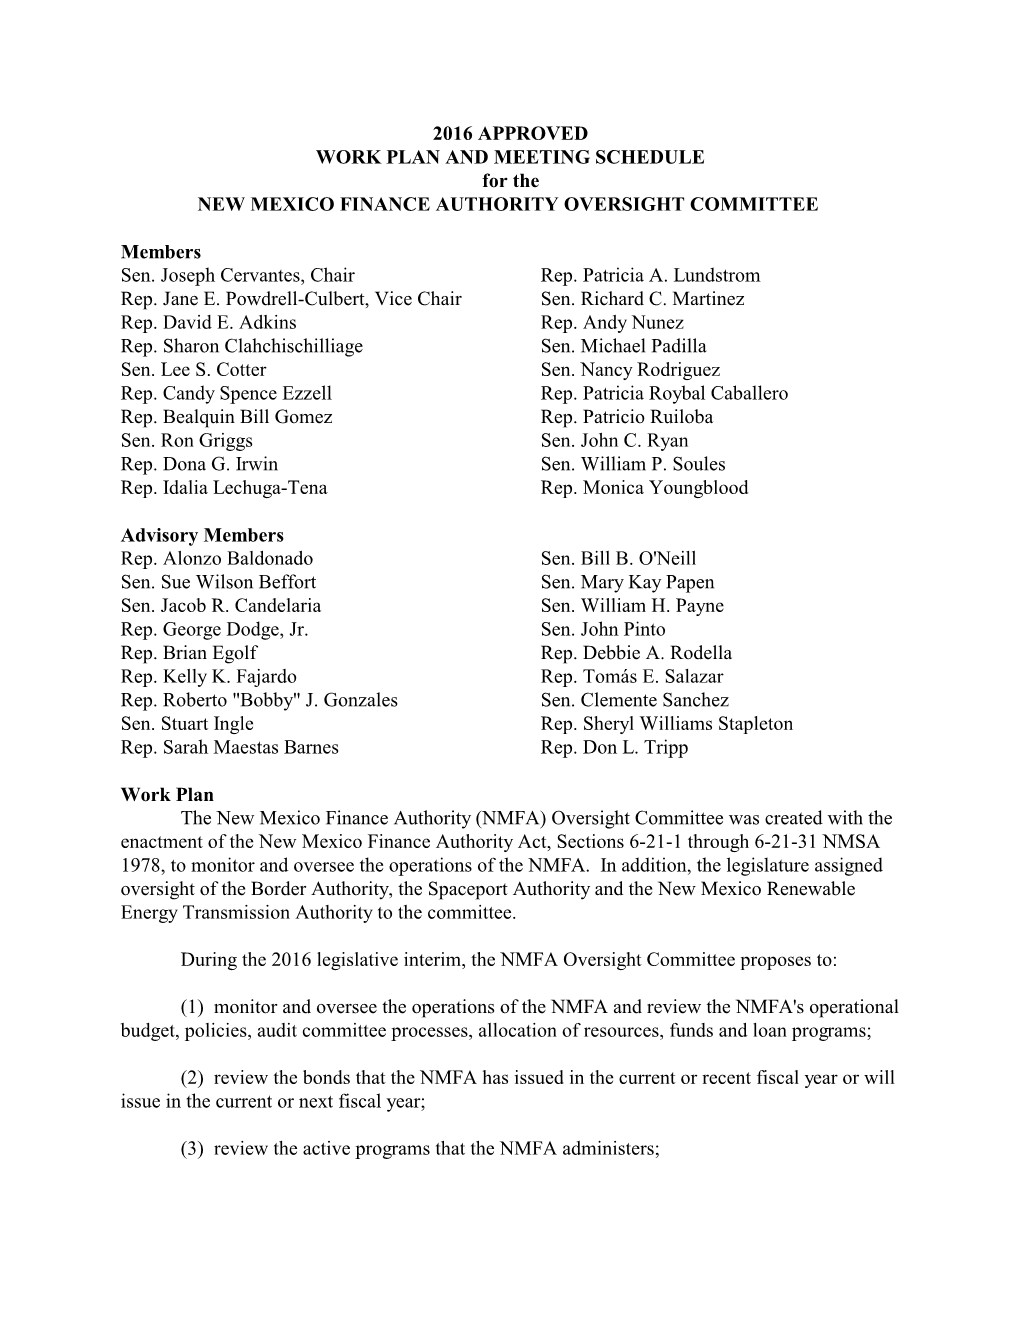 2016 APPROVED WORK PLAN and MEETING SCHEDULE for the NEW MEXICO FINANCE AUTHORITY OVERSIGHT COMMITTEE